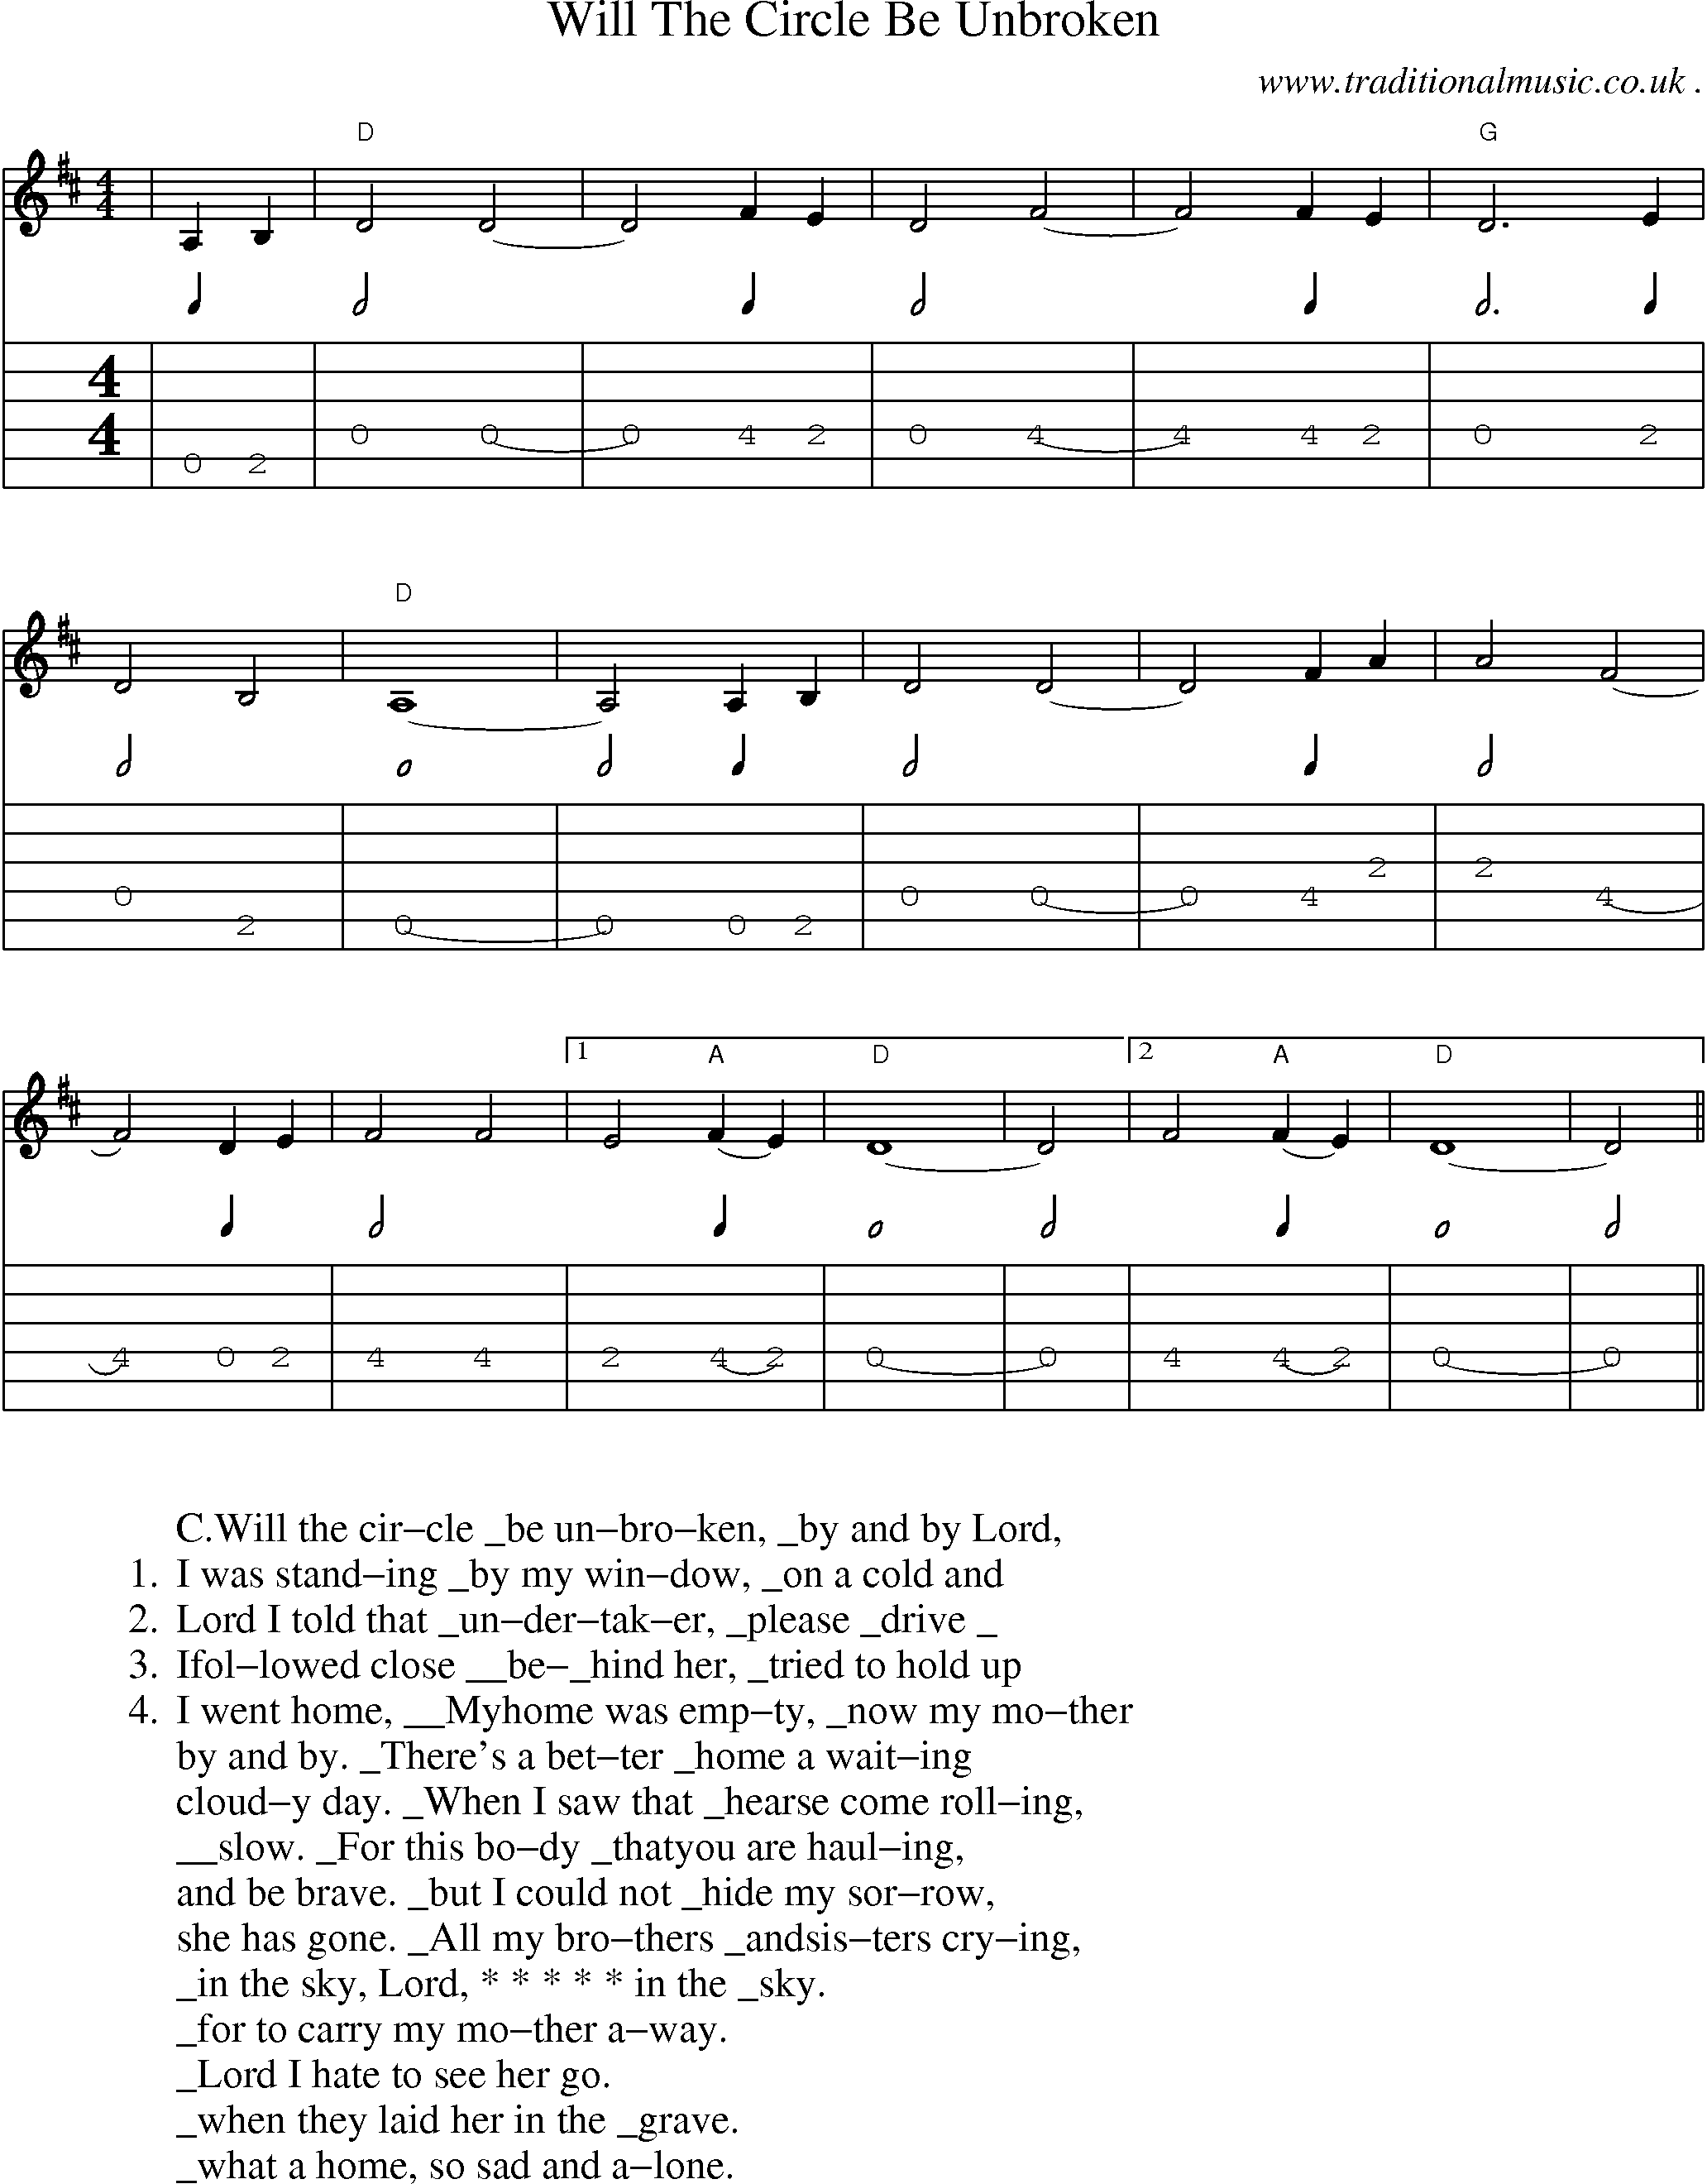 Music Score and Guitar Tabs for Will The Circle Be Unbroken